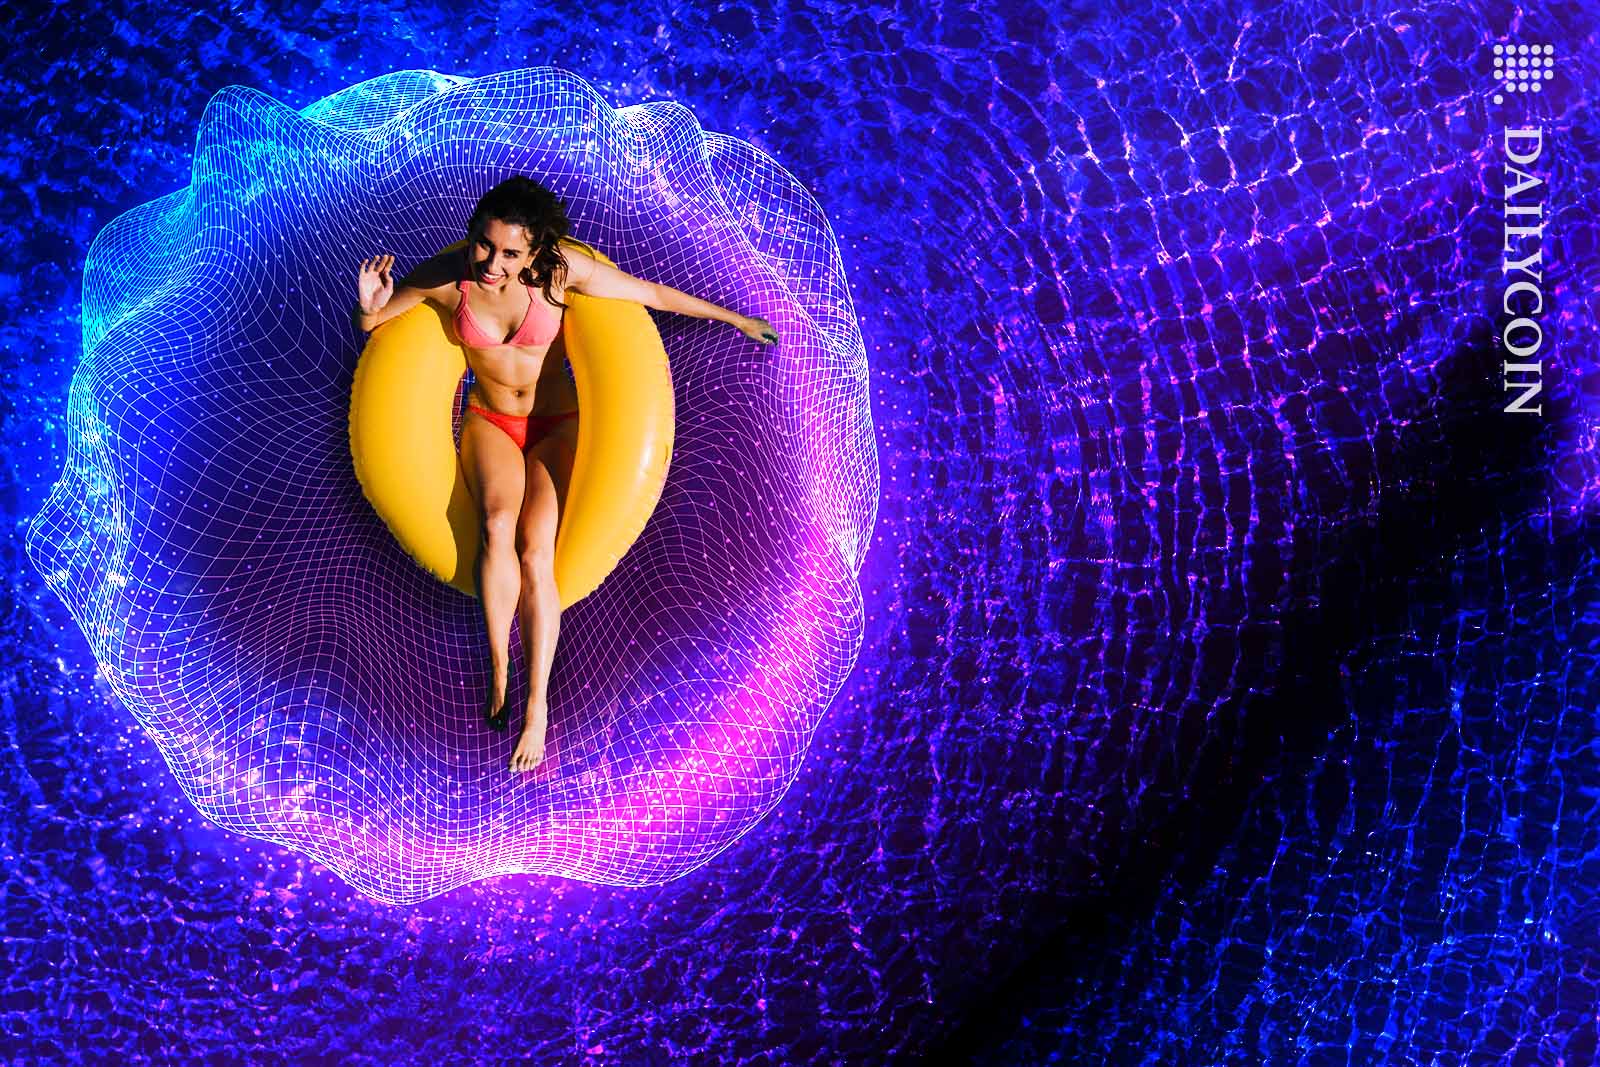 A woman in a yellow inflatable floating in a digital pool.